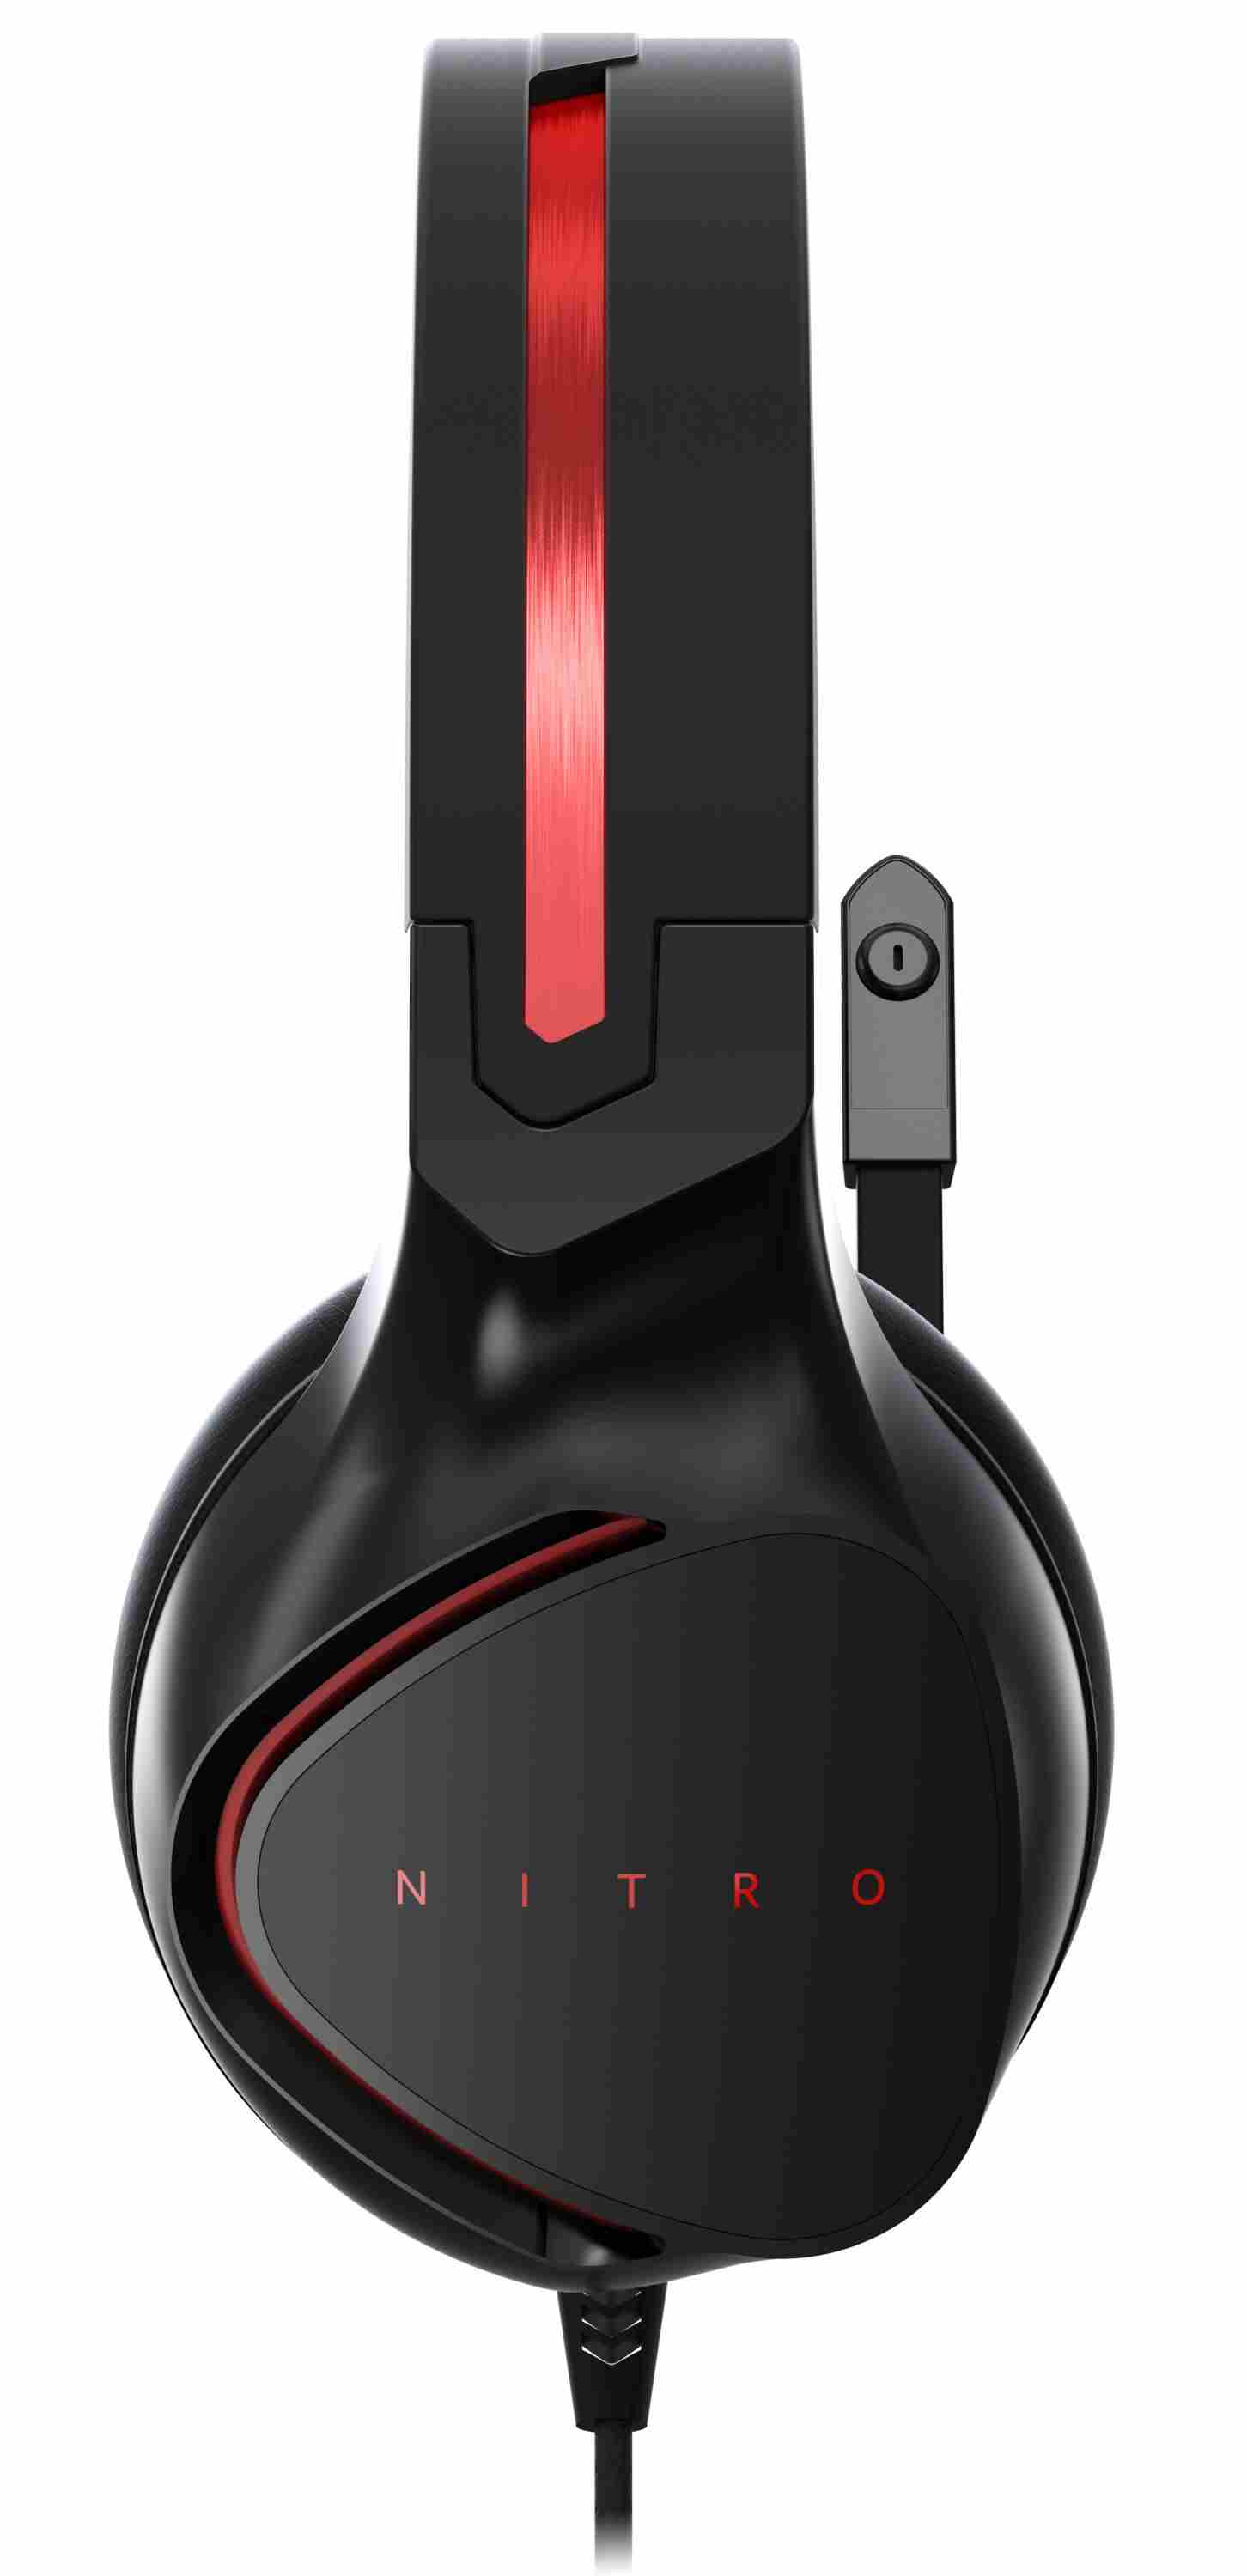 ACER NITRO GAMING HEADSET - 3, 5mm jack connector,  50mm speakers,  impedance 21 Ohm,  Microphone,  (Retail pack)0 